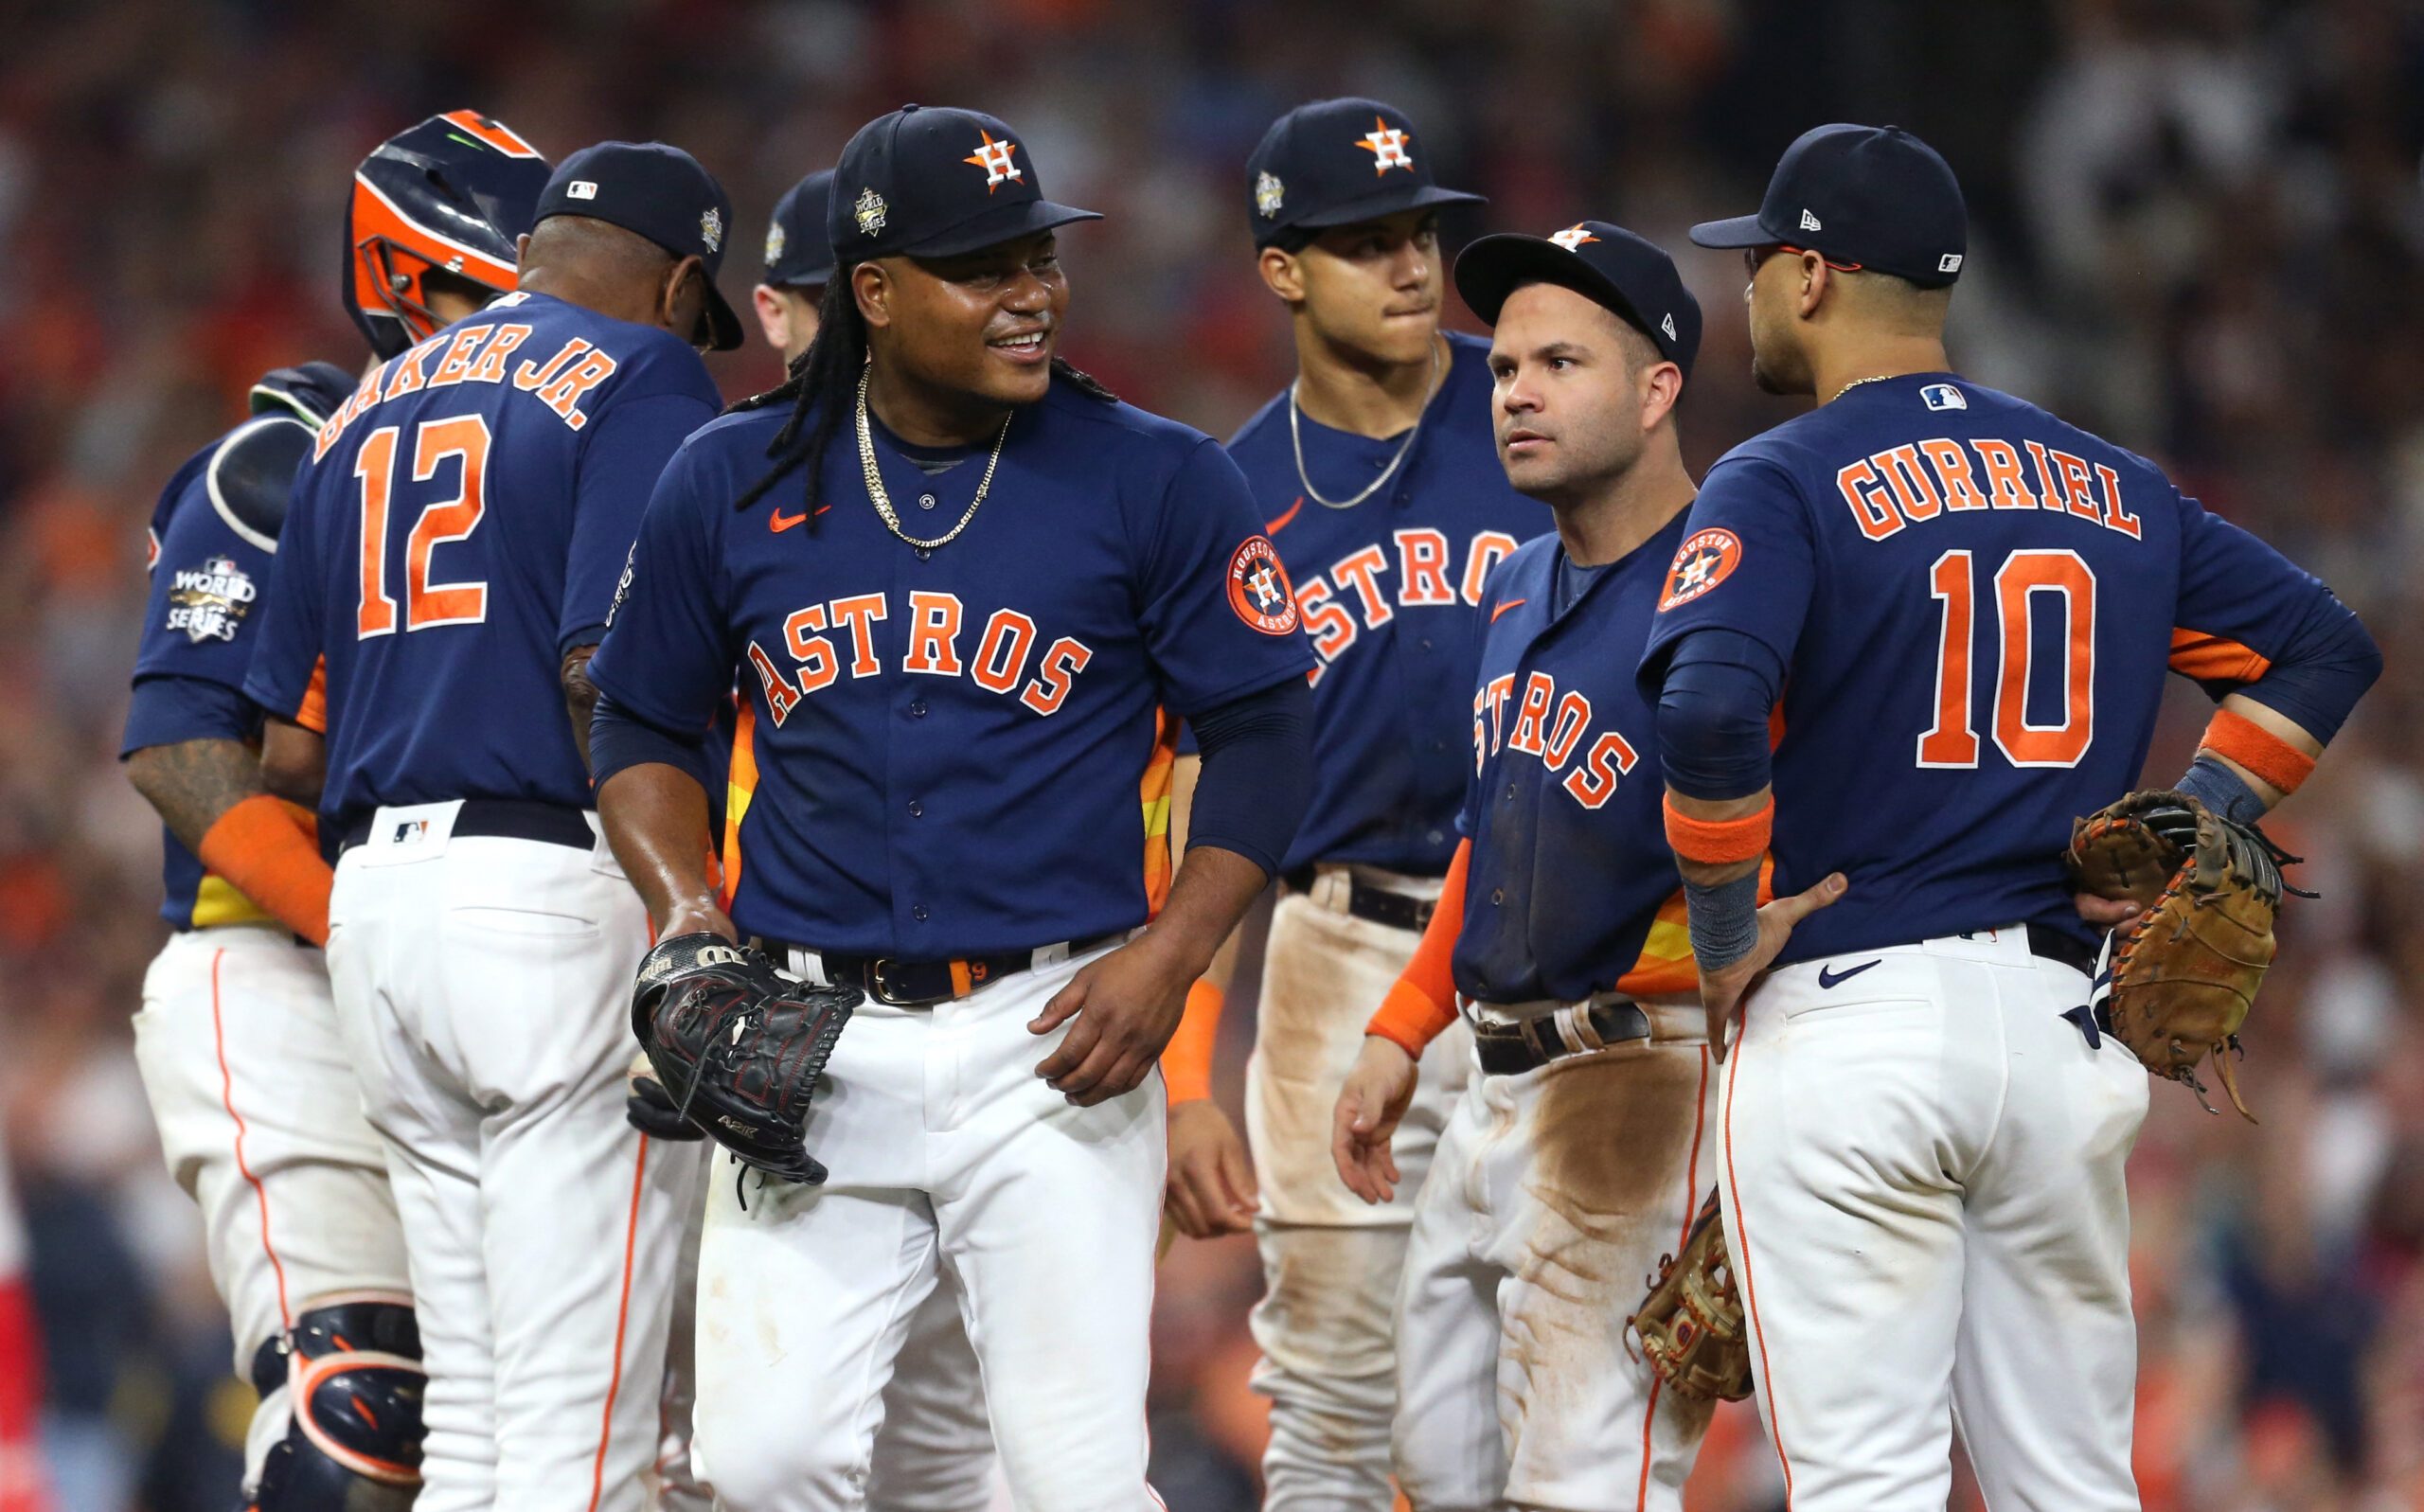 ‘We’re winning legally’: Framber Valdez responds to renewed Astros cheating allegations